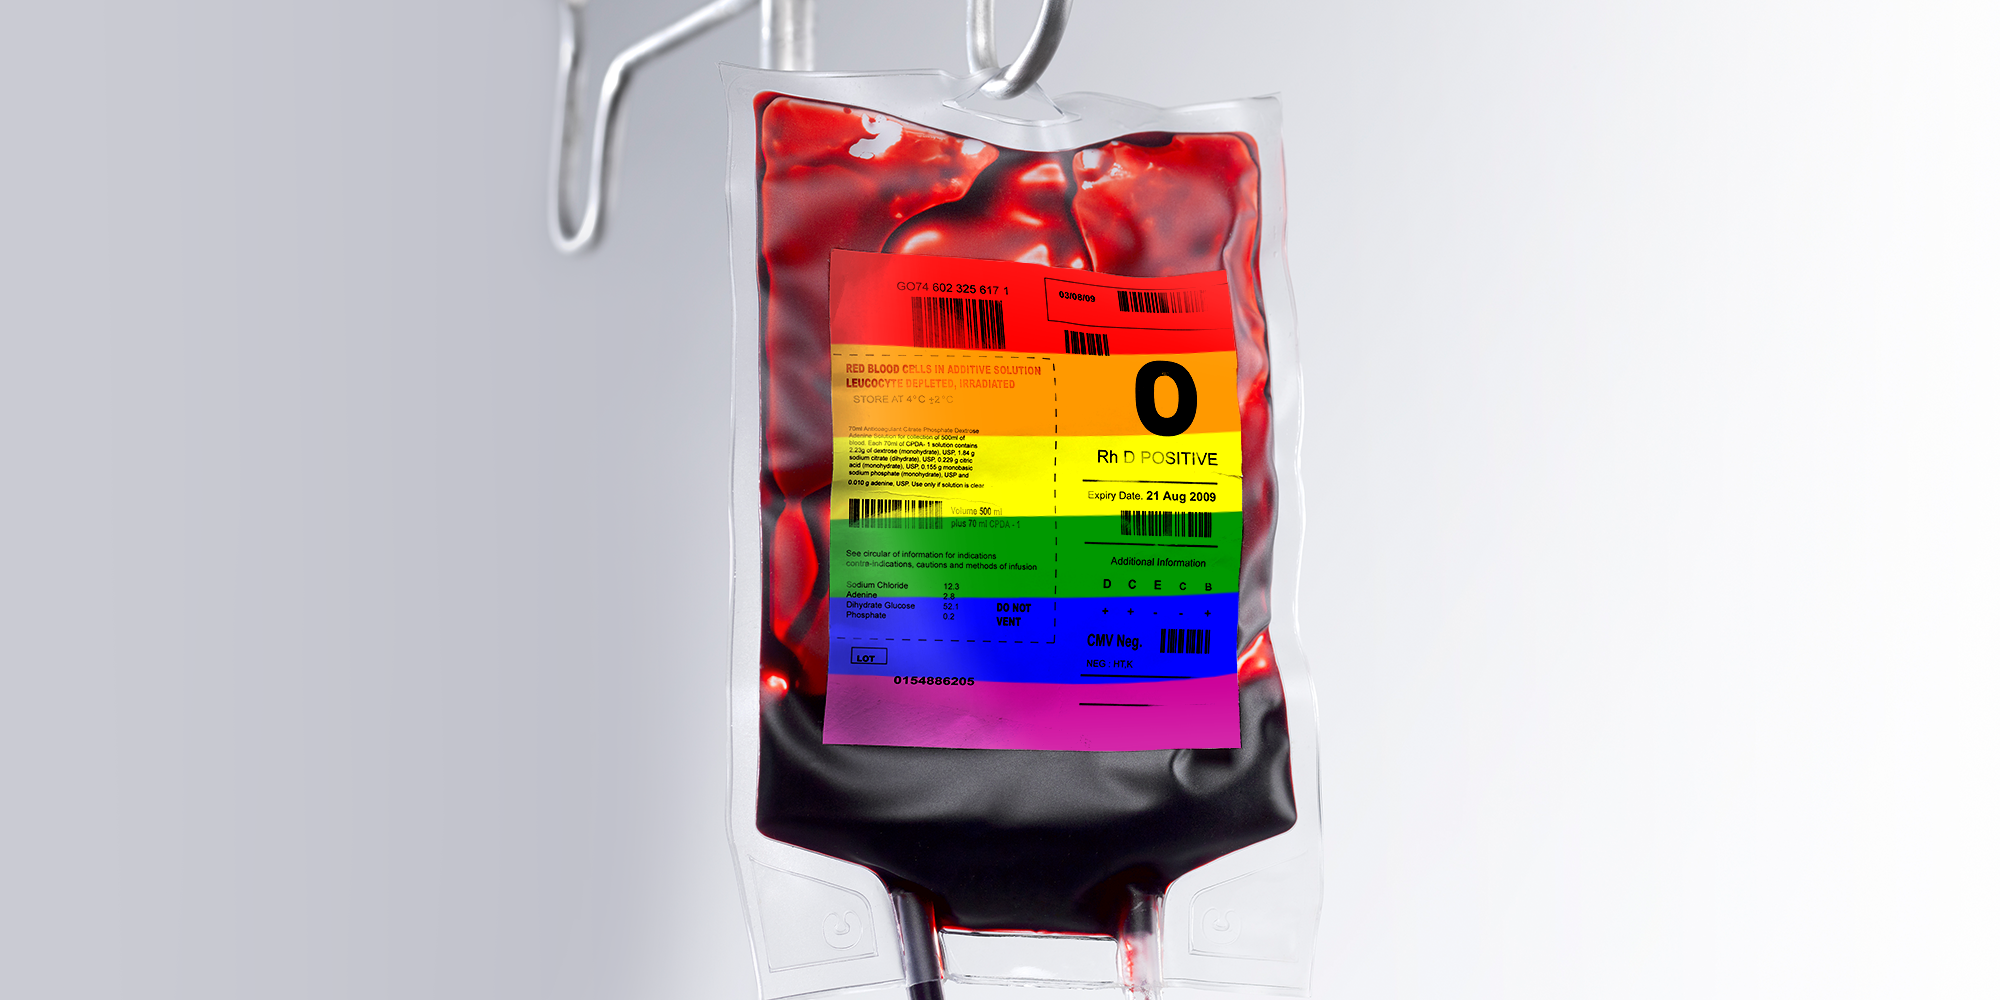 can gay men donate blood in america